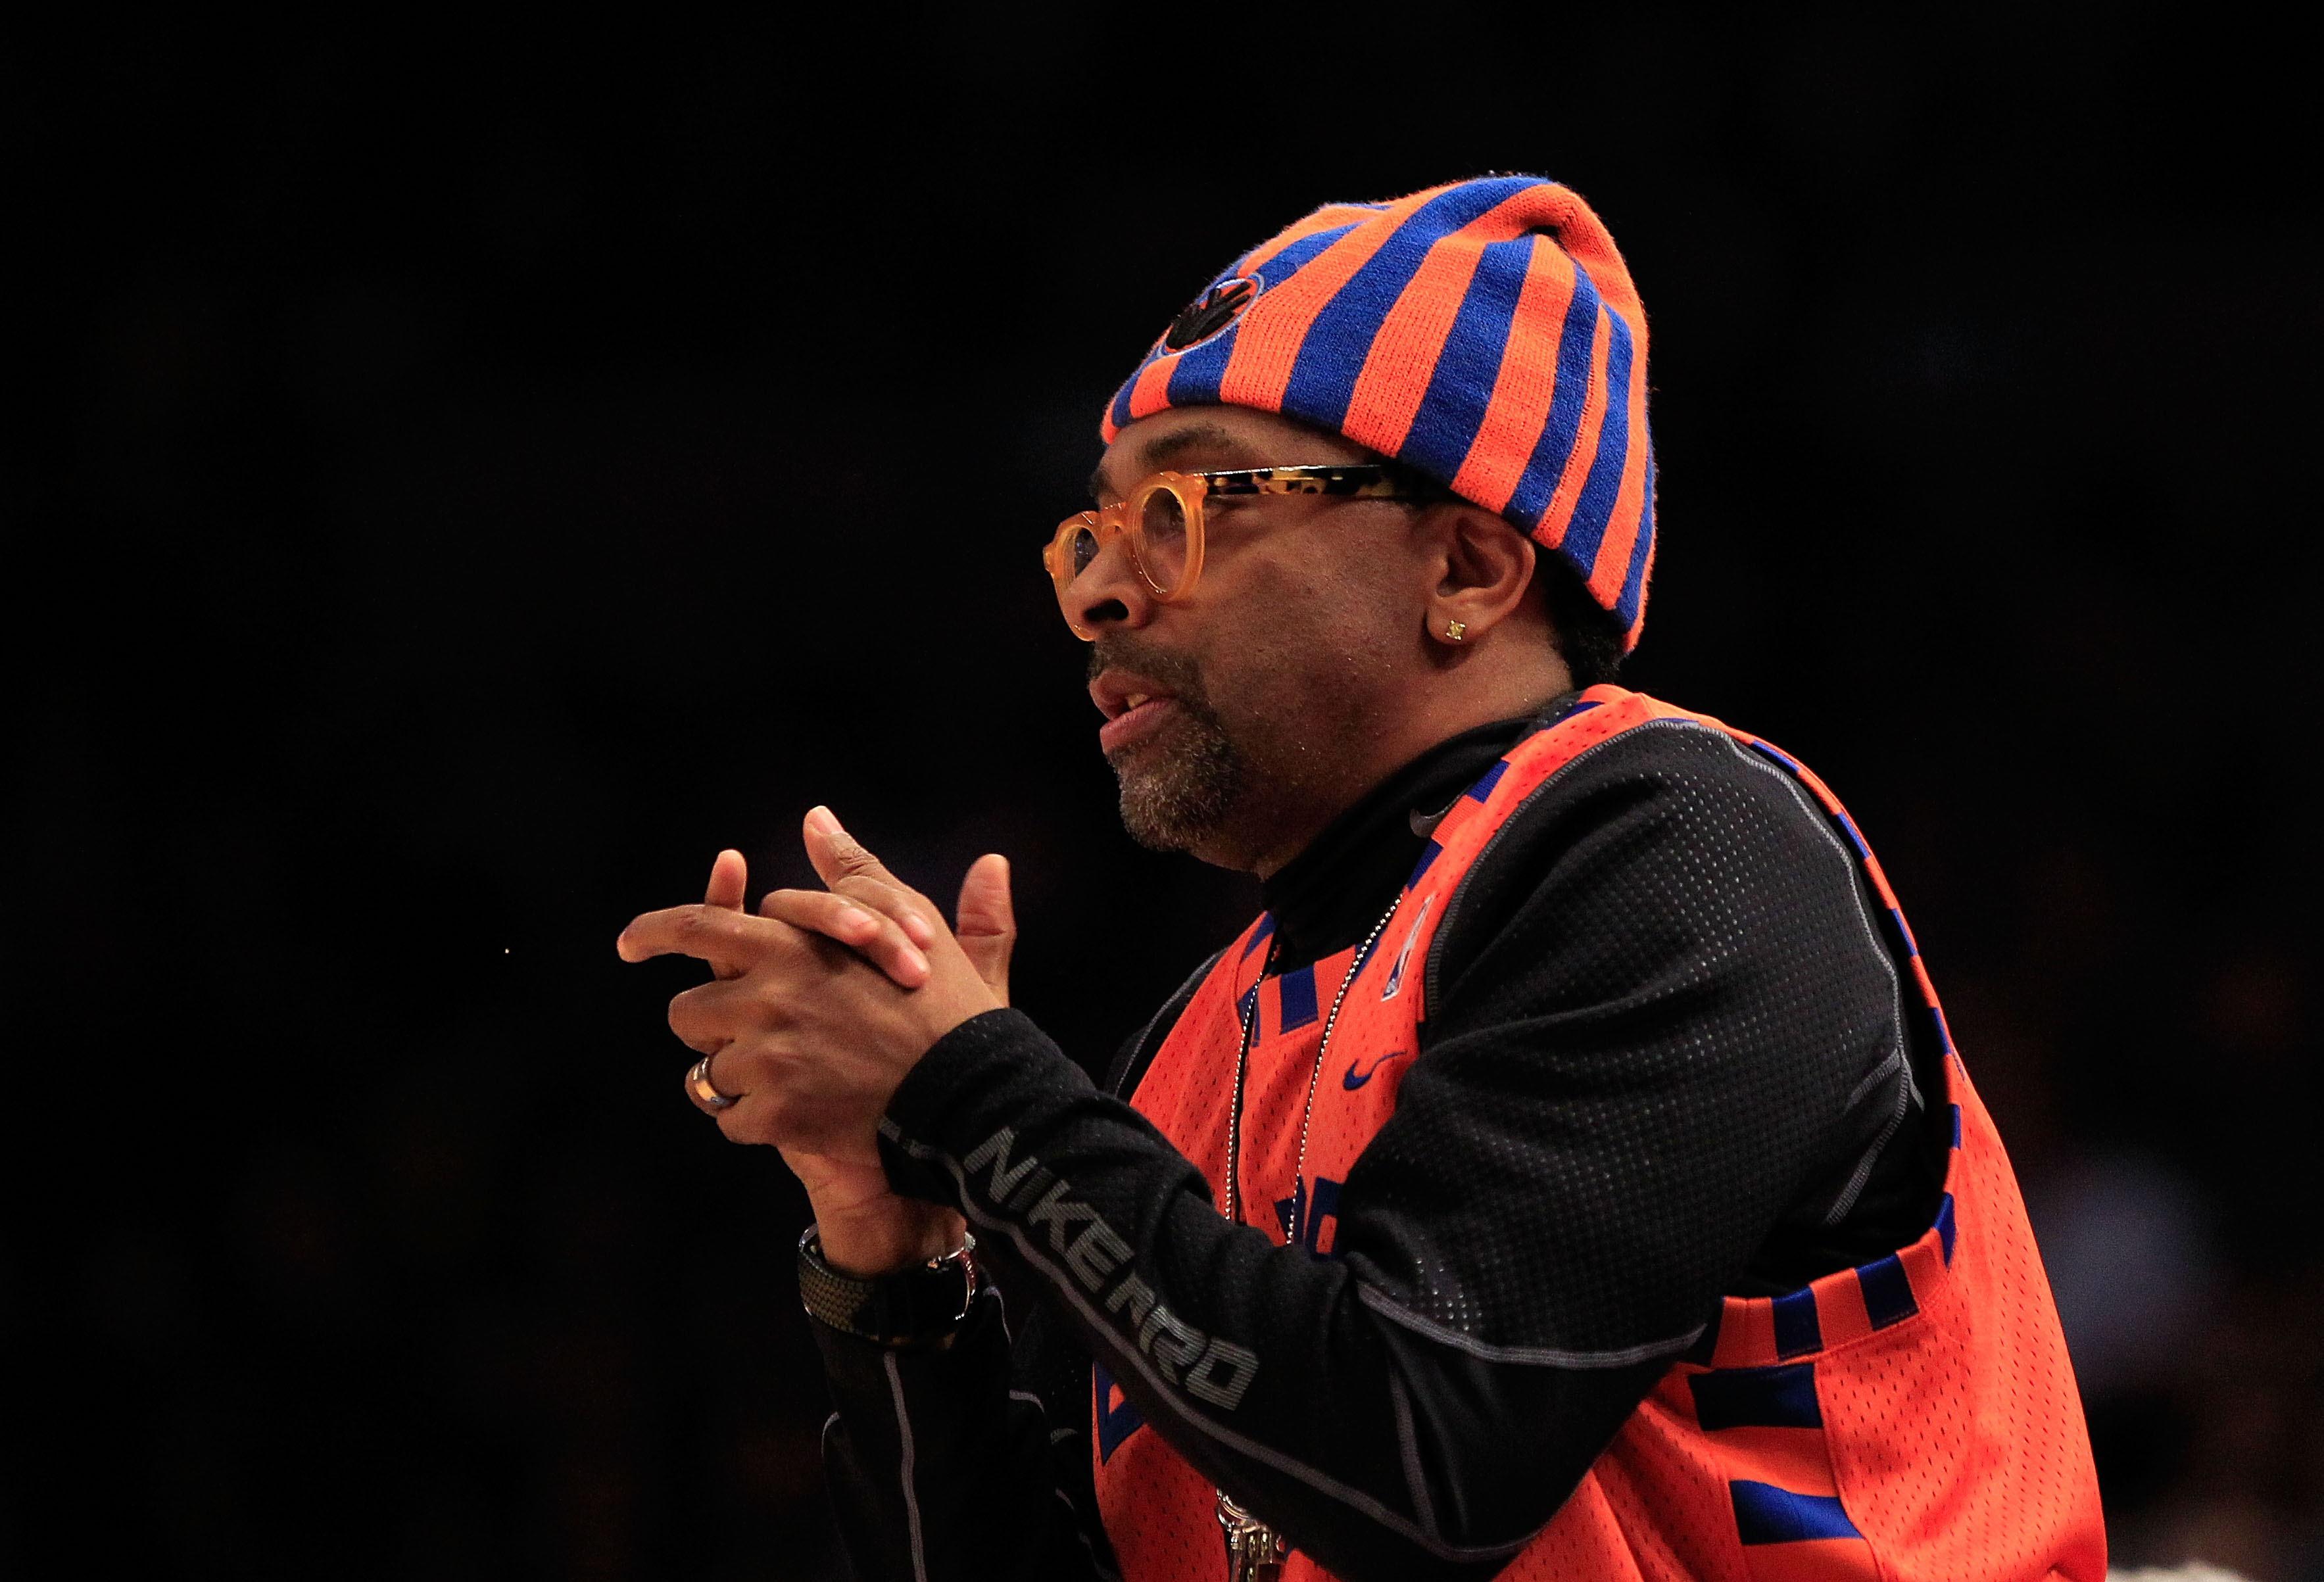 NEW YORK, NY - JANUARY 24: Film director Spike Lee  watches the game between the Washington Wizards and the New York Knicks at Madison Square Garden on January 24, 2011 in New York City. NOTE TO USER: User expressly acknowledges and agrees that, by downlo